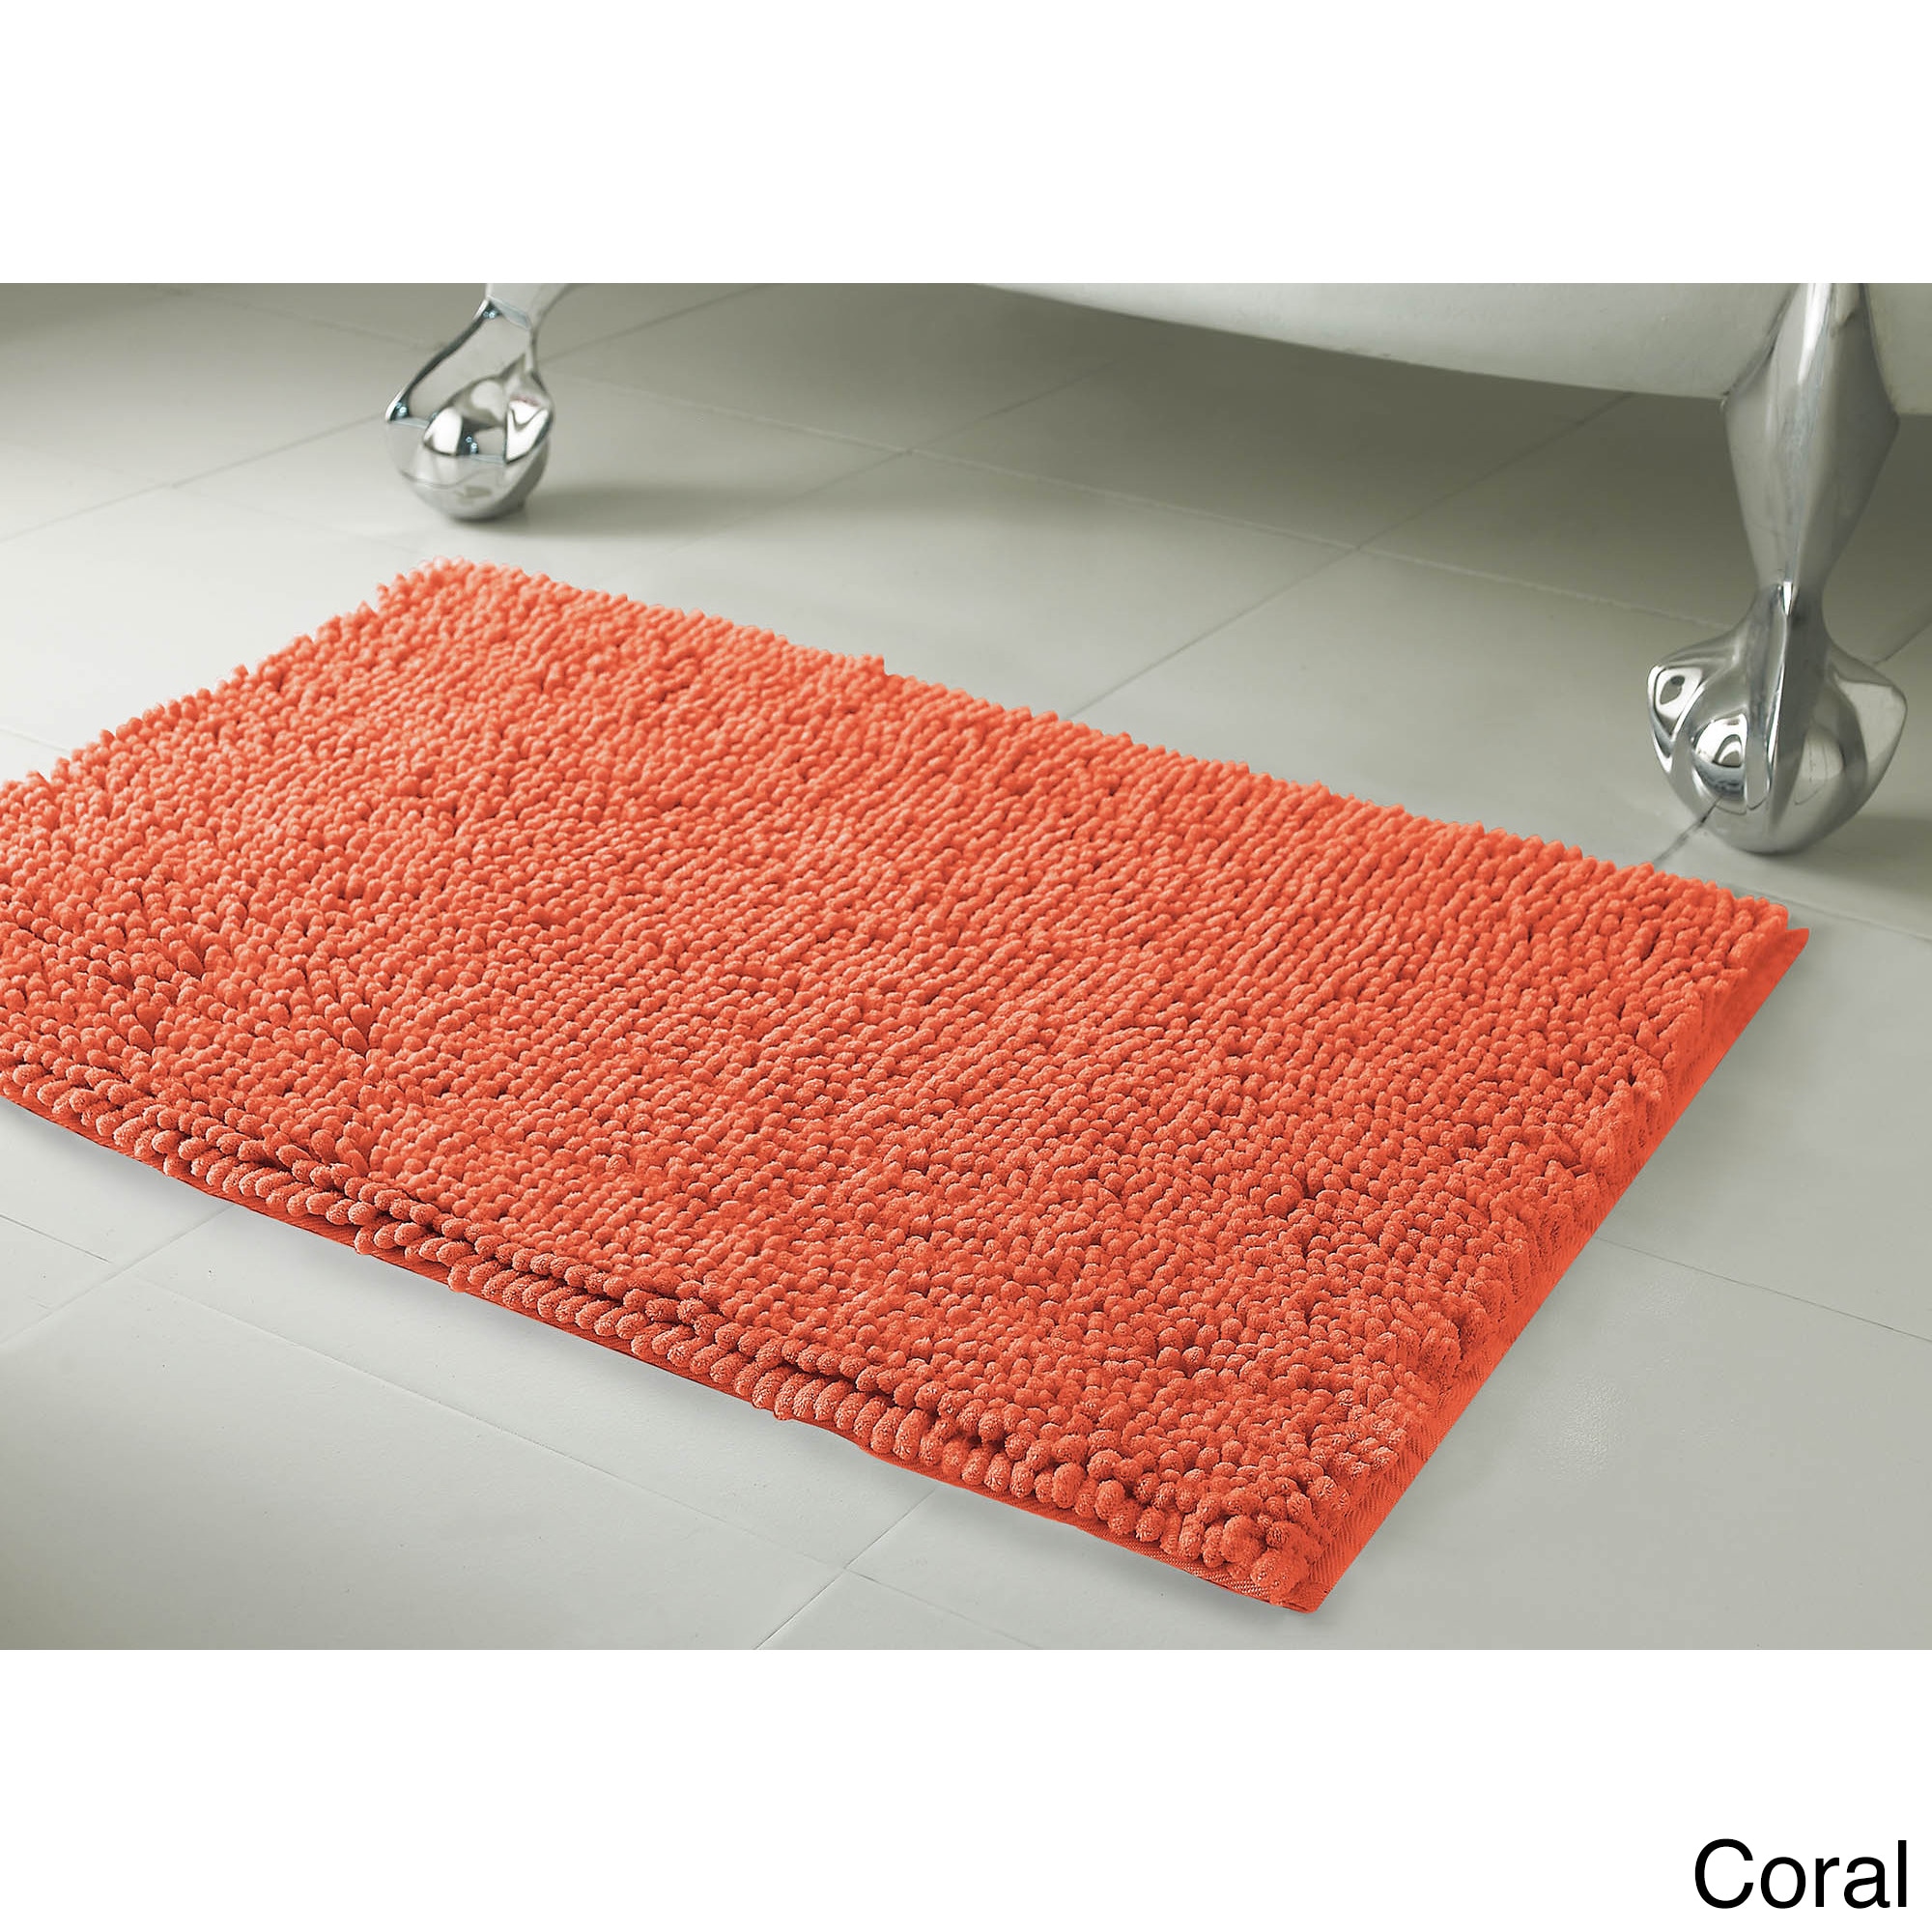 Bathroom Rugs - 2-Piece Memory Foam Bathroom Set with Chenille Shag Top and  Non-Slip Base by Windsor Home - On Sale - Bed Bath & Beyond - 10707588